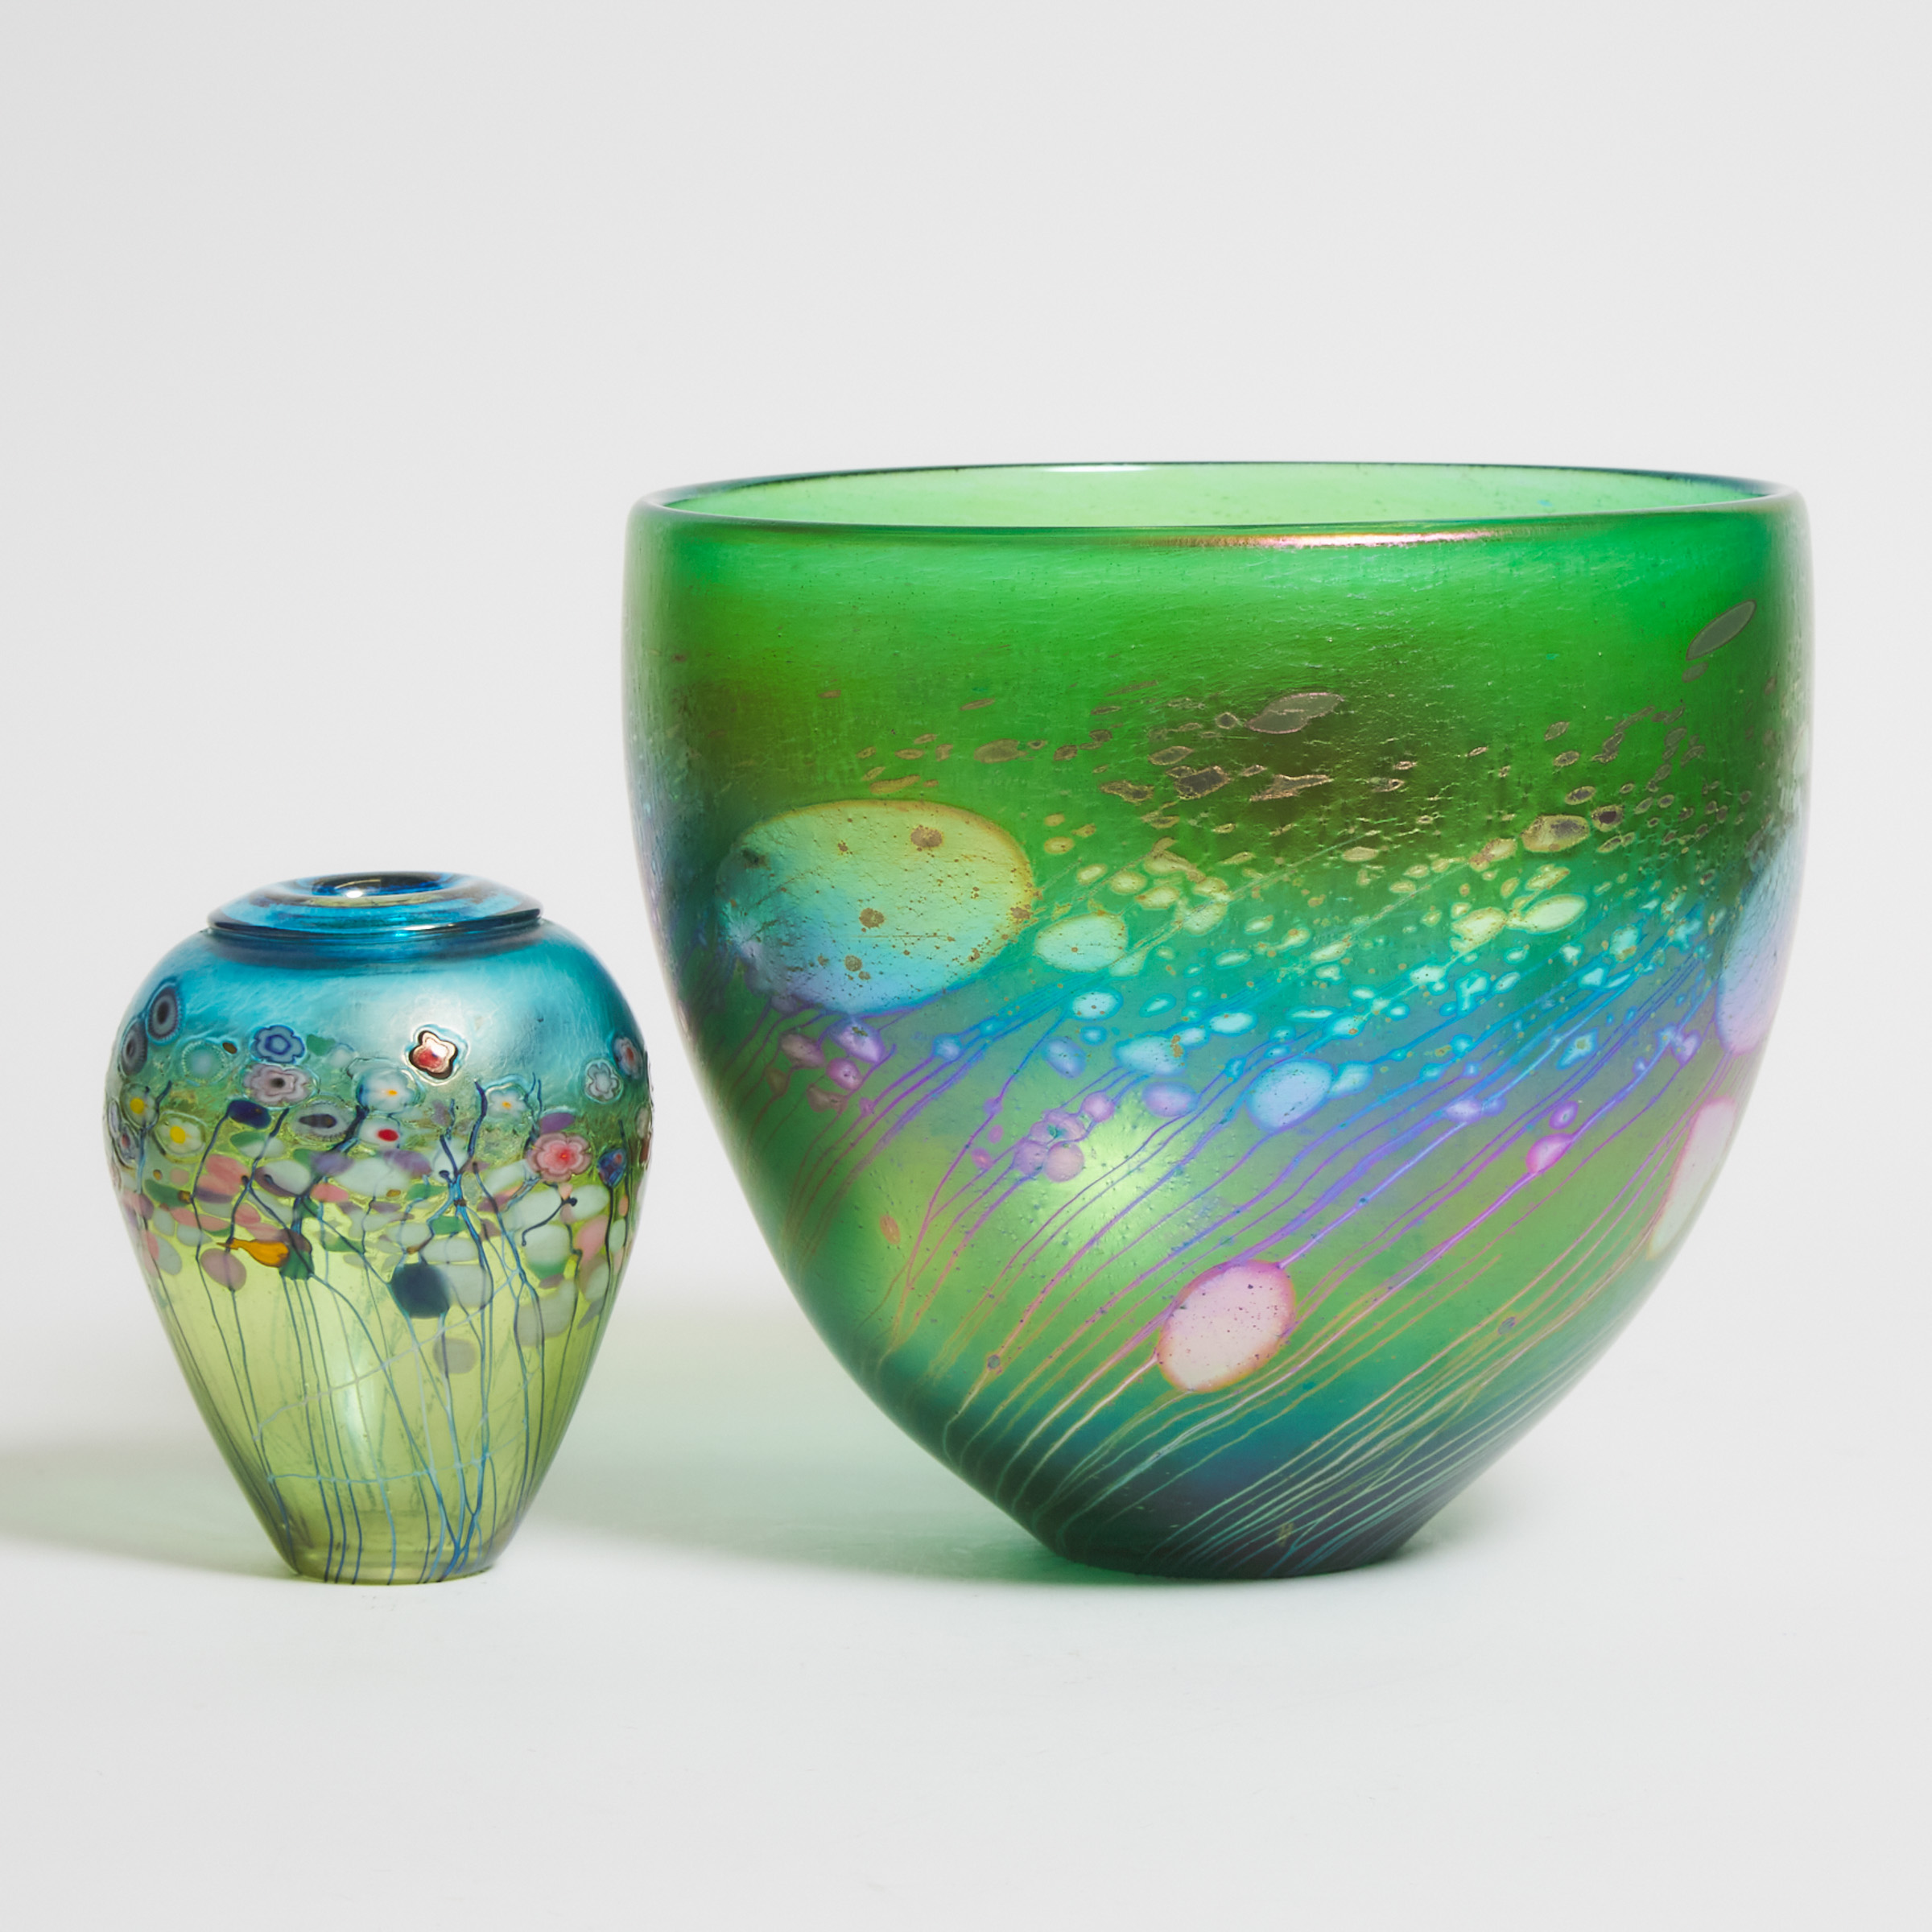 Robert Held (American-Canadian, b.1943), Two Iridescent Glass Vases, late 20th century